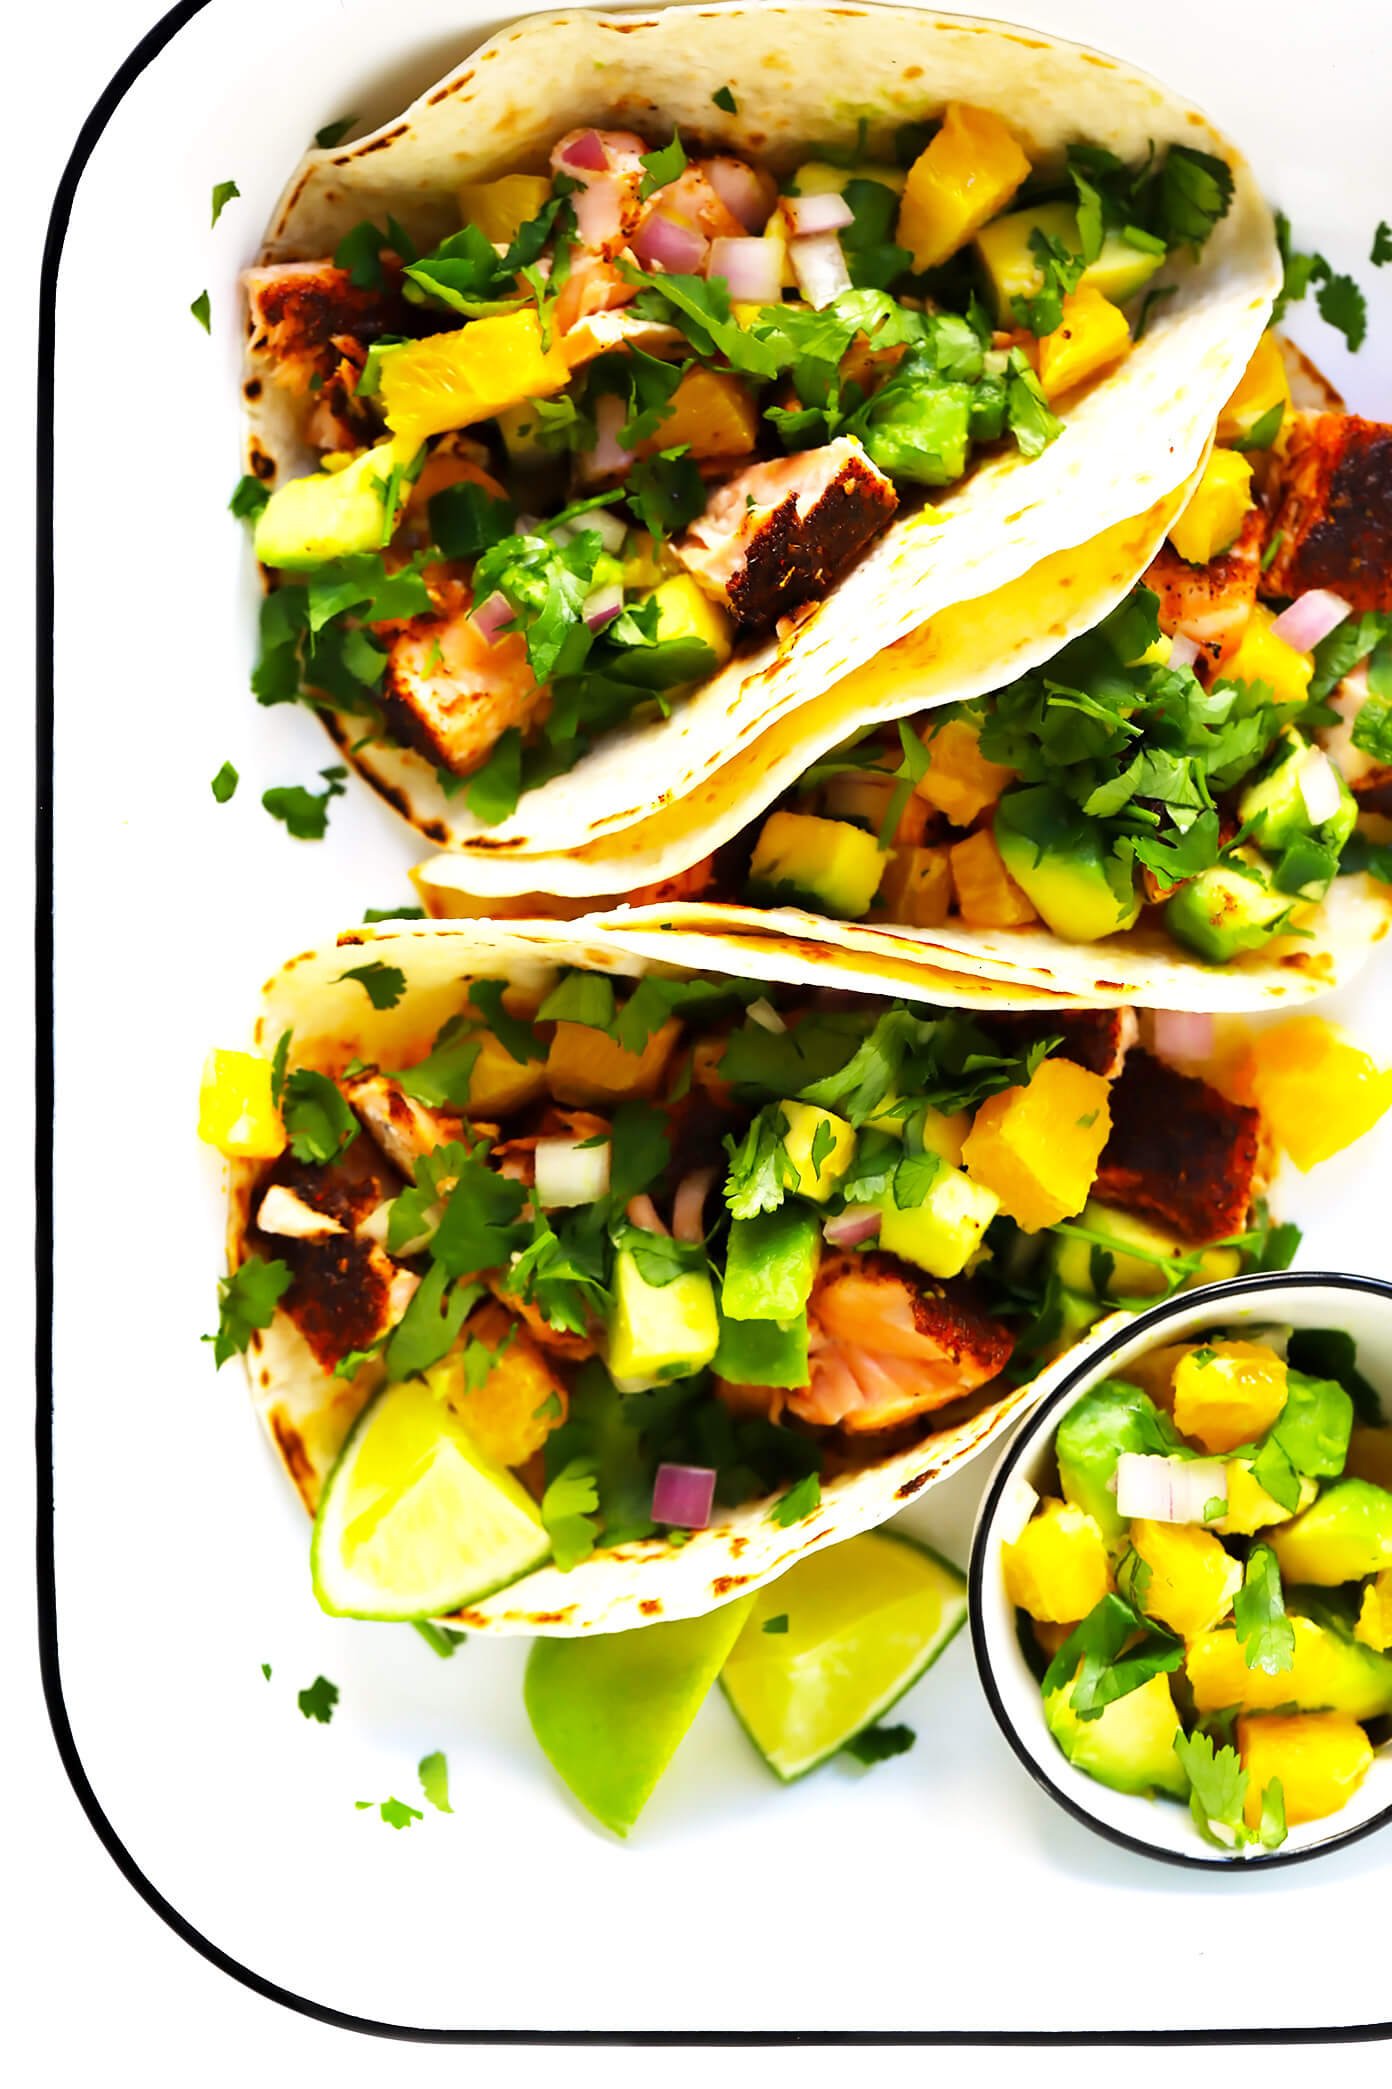 salmon tacos with citrus salsa on top